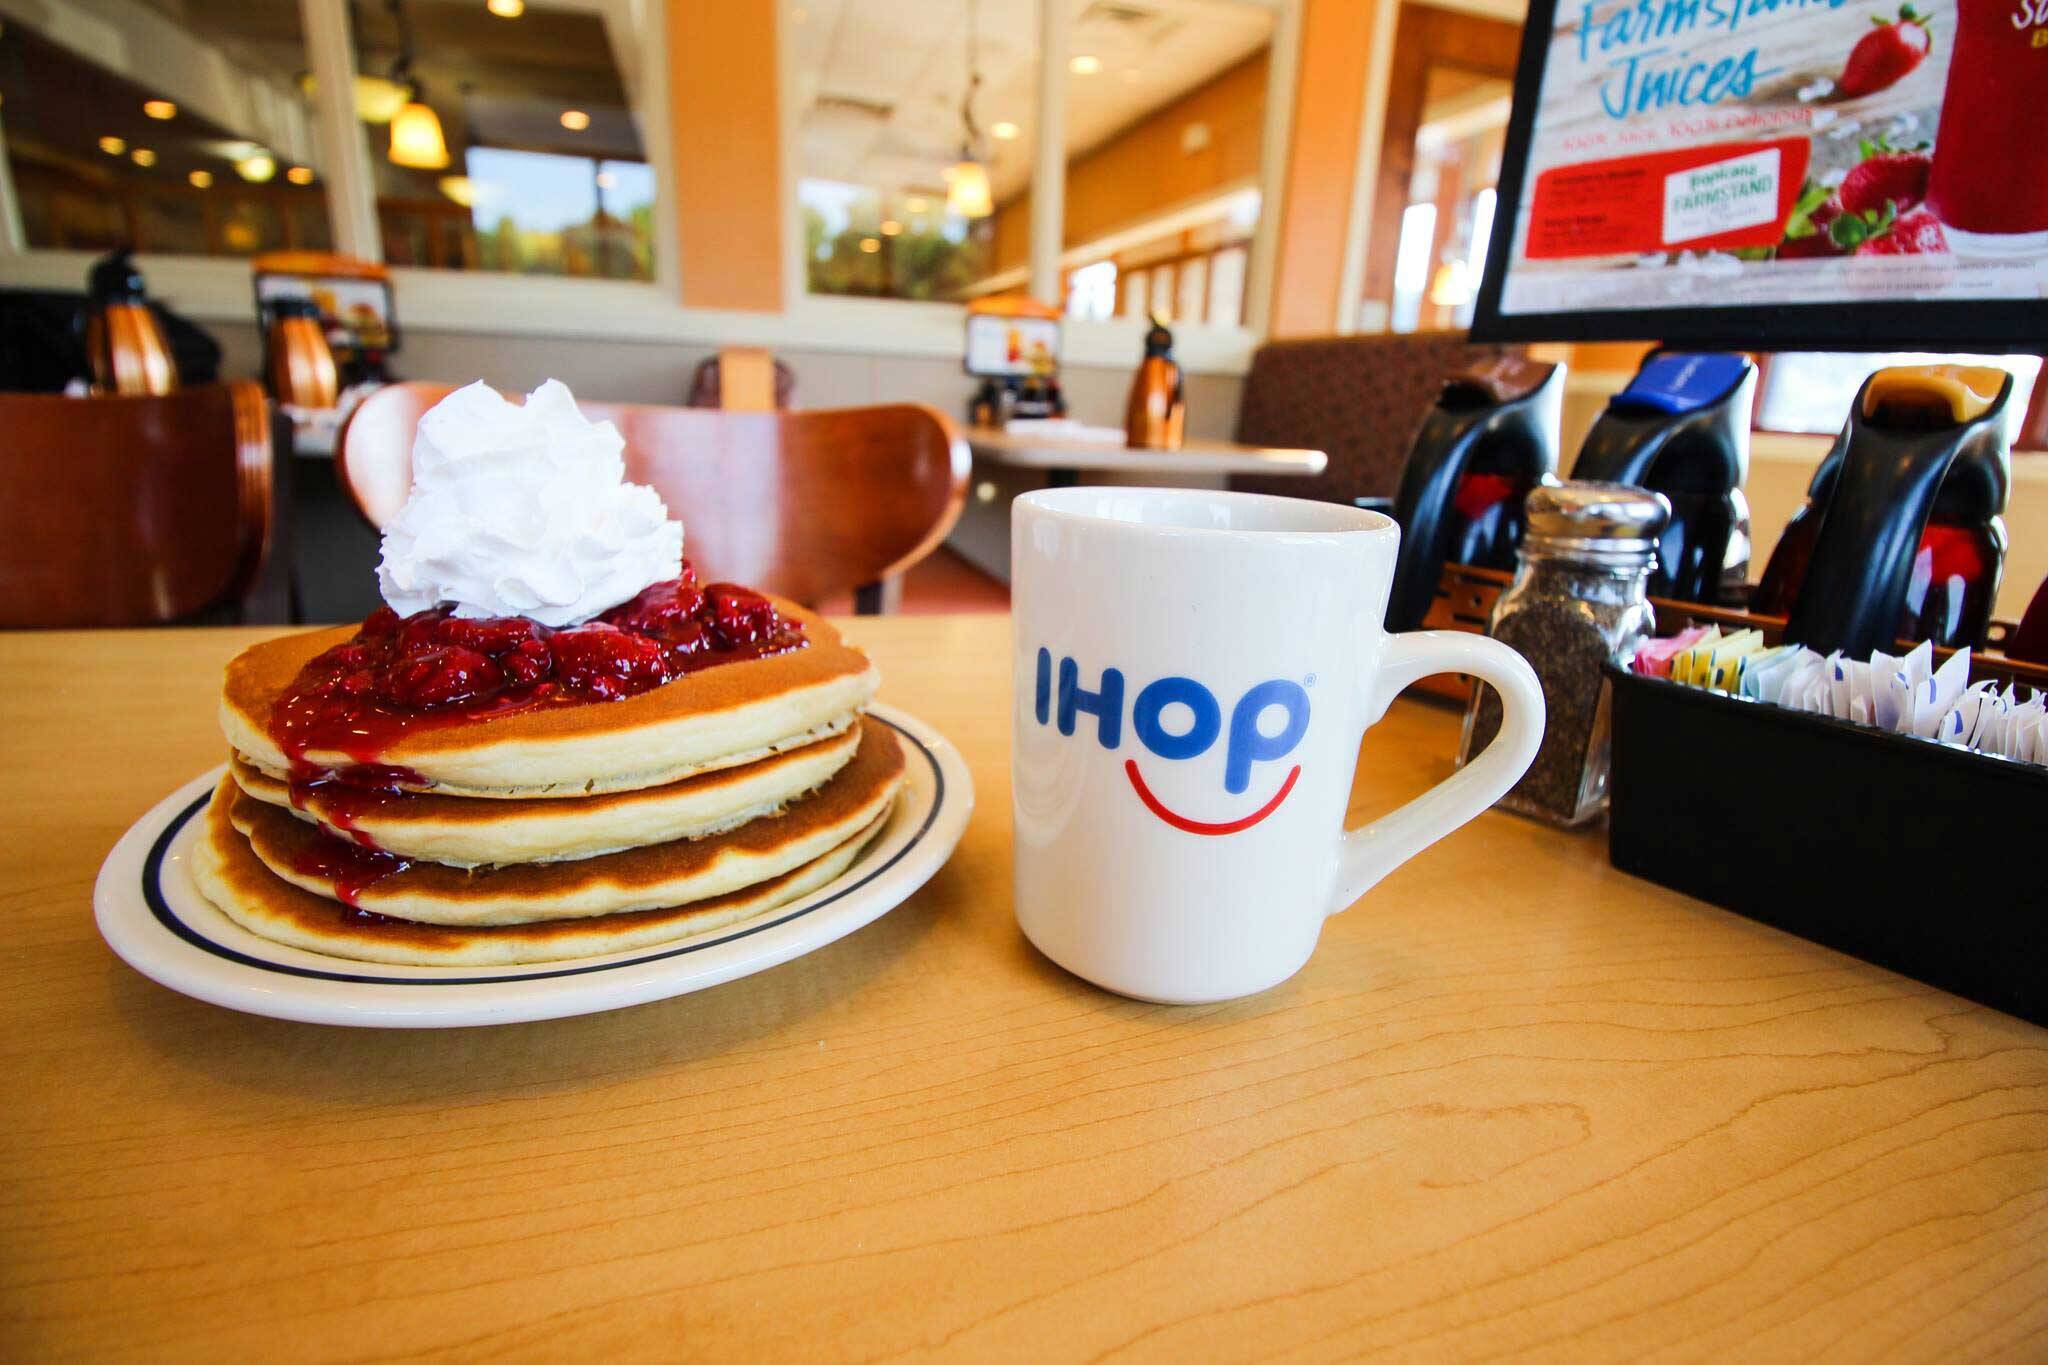 IHOP is opening 15 locations in Toronto over the next 7 years